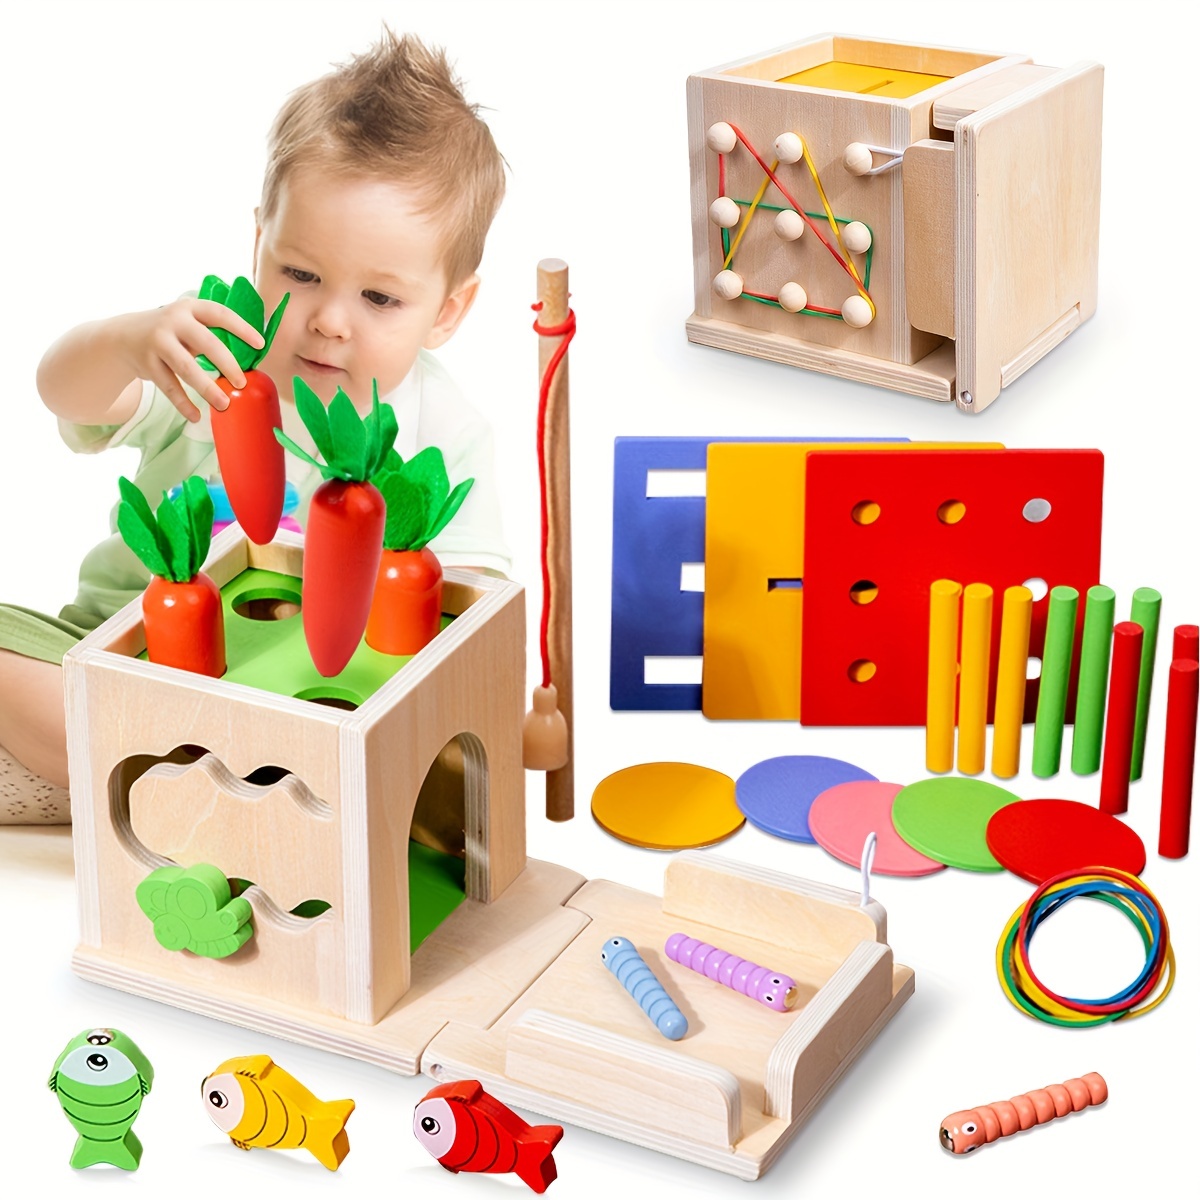 Wooden Toys for Early Learning, Wooden Educational Toys for Toddlers